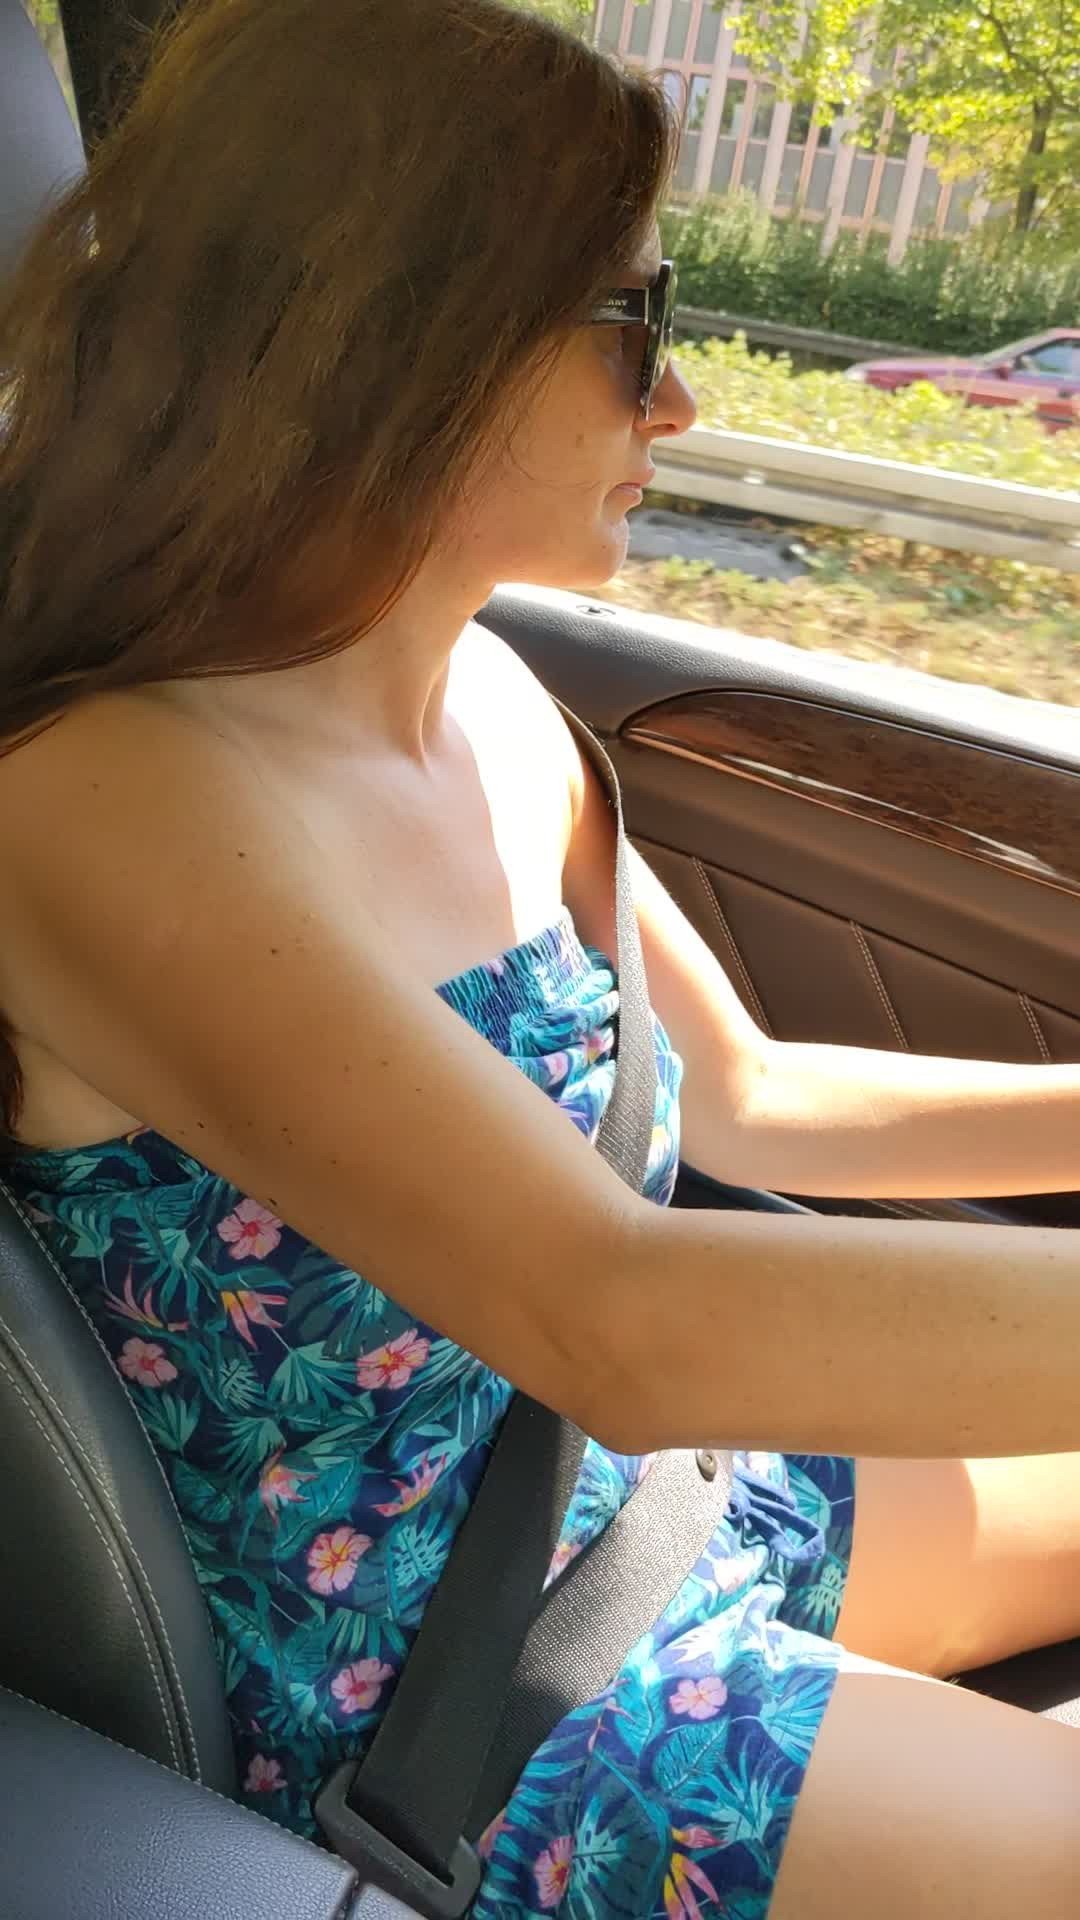 Watch the Video by HotwifeHunny with the username @HotwifeHunny, who is a star user, posted on July 23, 2022. The post is about the topic MILF. and the text says 'Just driving around 😅 Could I catch your attention? 39yo'